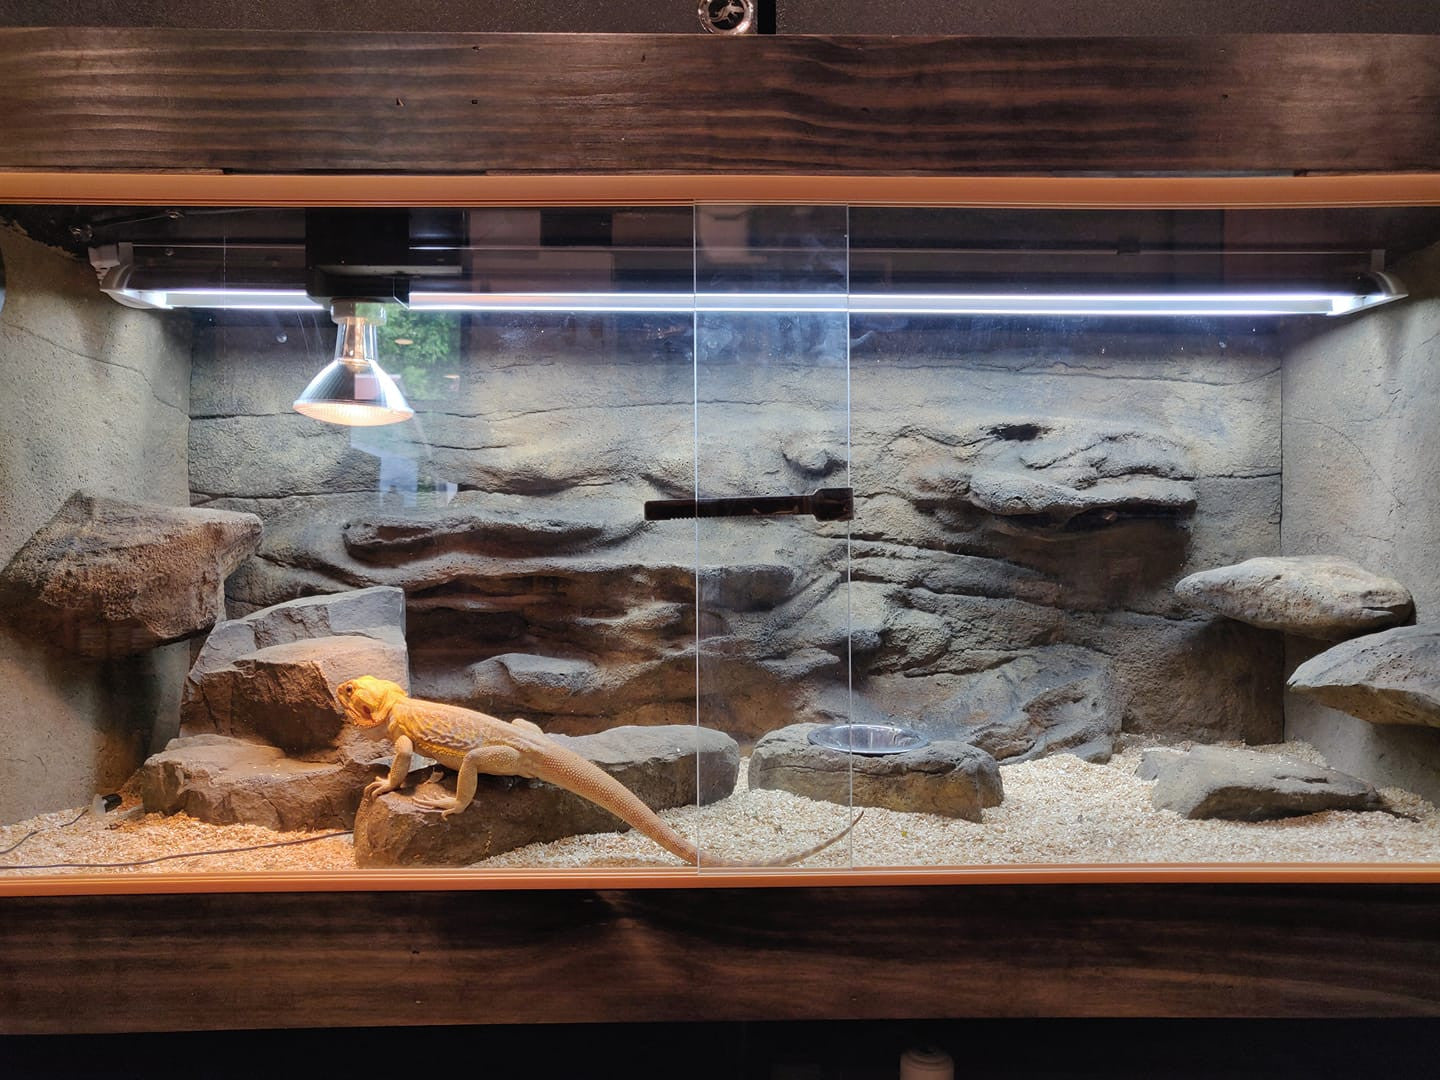 Choosing the Perfect Enclosure for Your Reptile